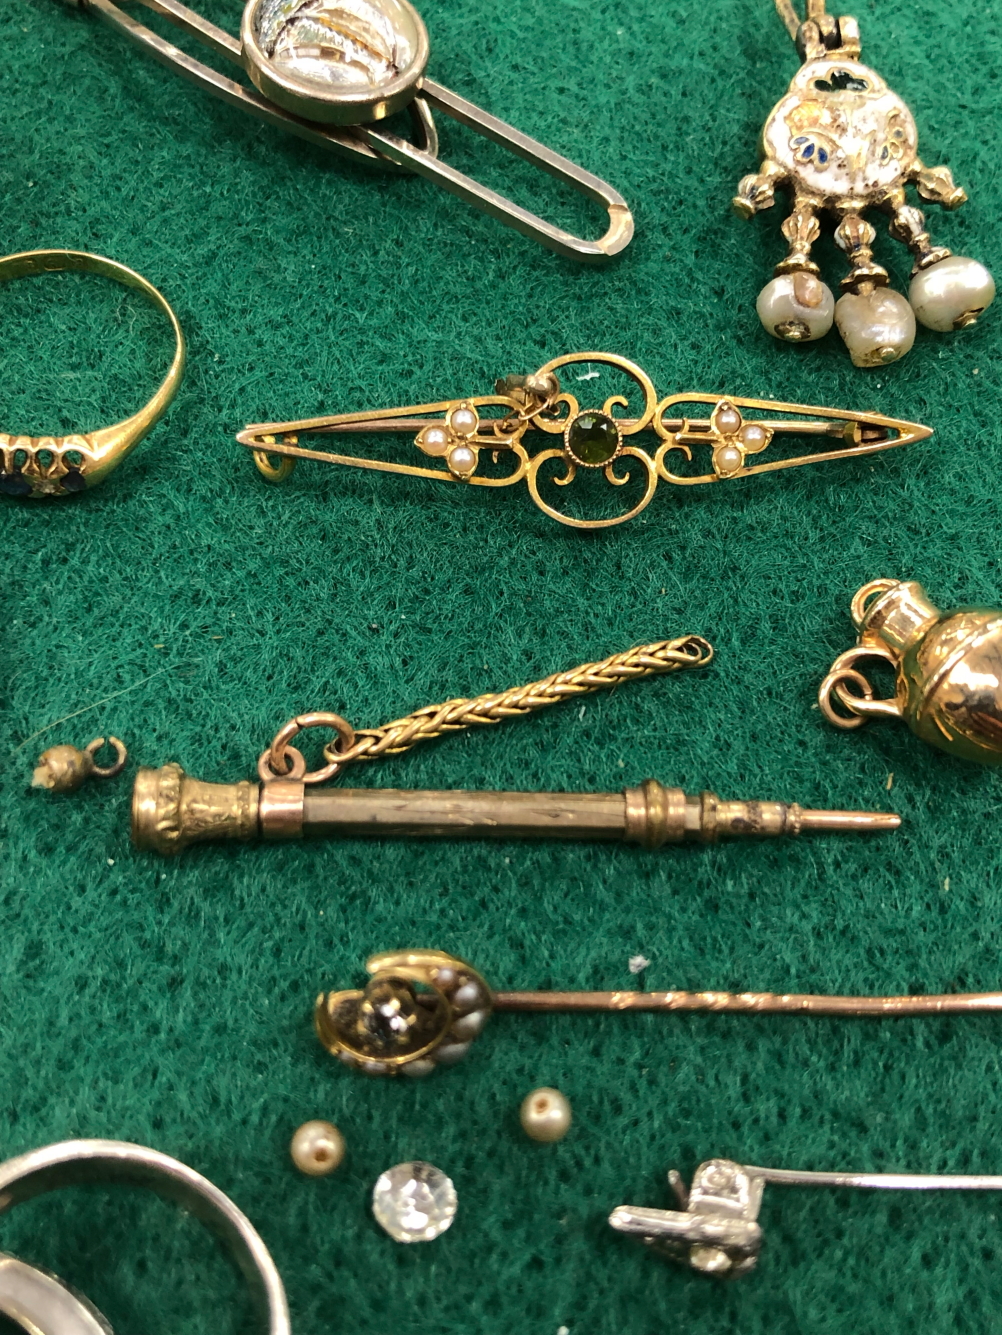 A 9ct GOLD GEMSET BROOCH, A 15ct GOLD BAR BROOCH, A CRESCENT MOON PEARL AND DIAMOND STICK PIN,AN - Image 4 of 6